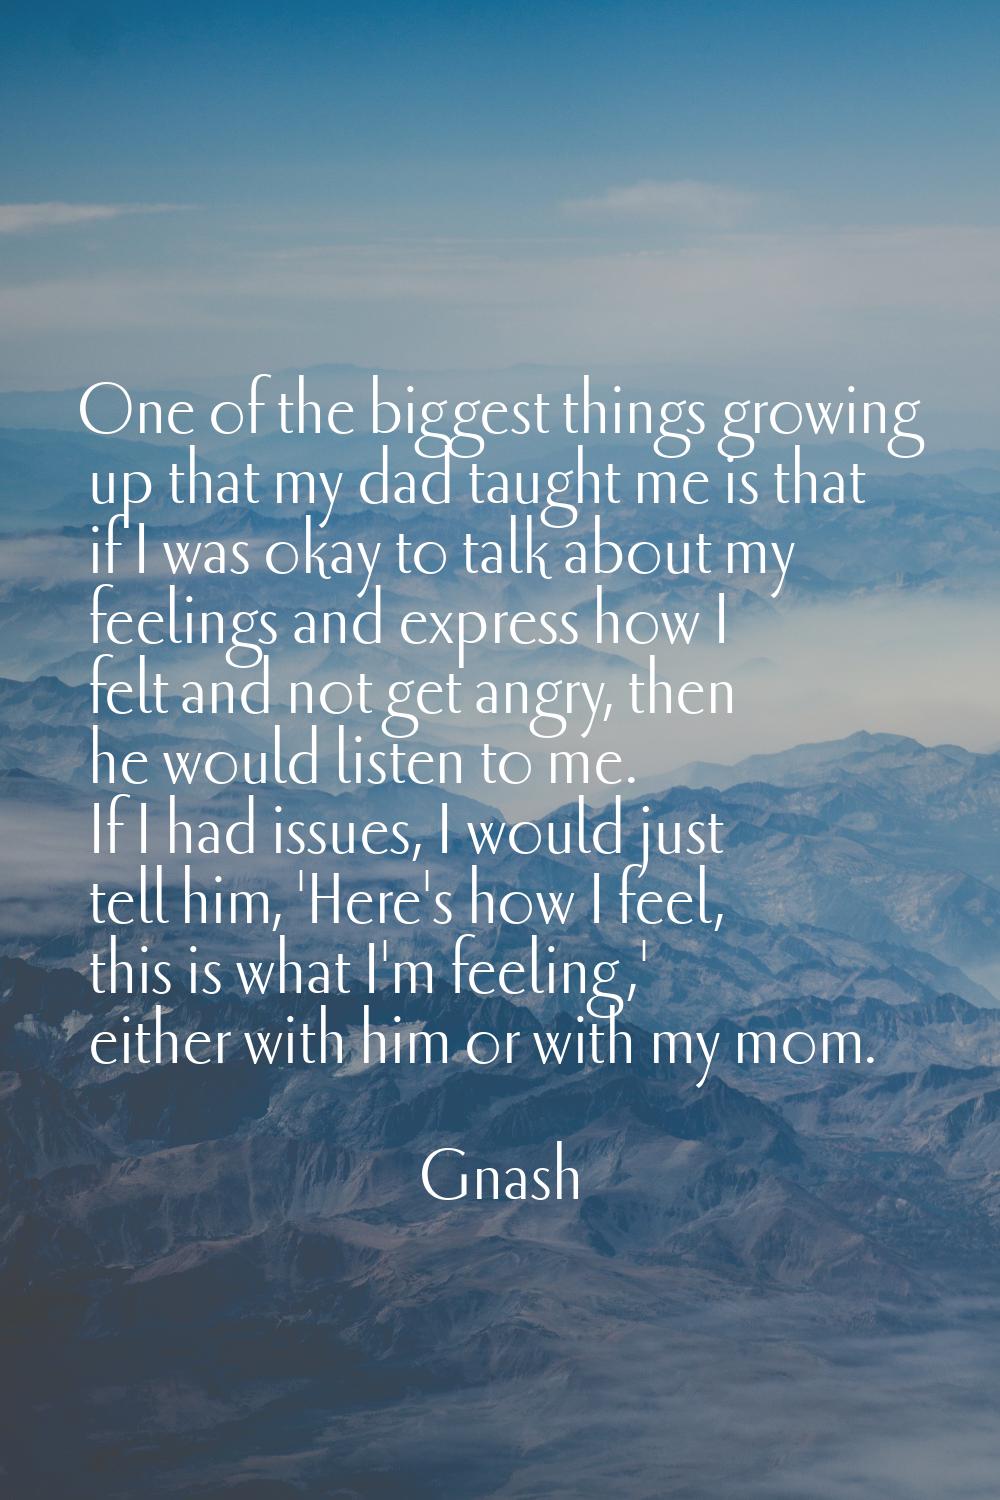 One of the biggest things growing up that my dad taught me is that if I was okay to talk about my f